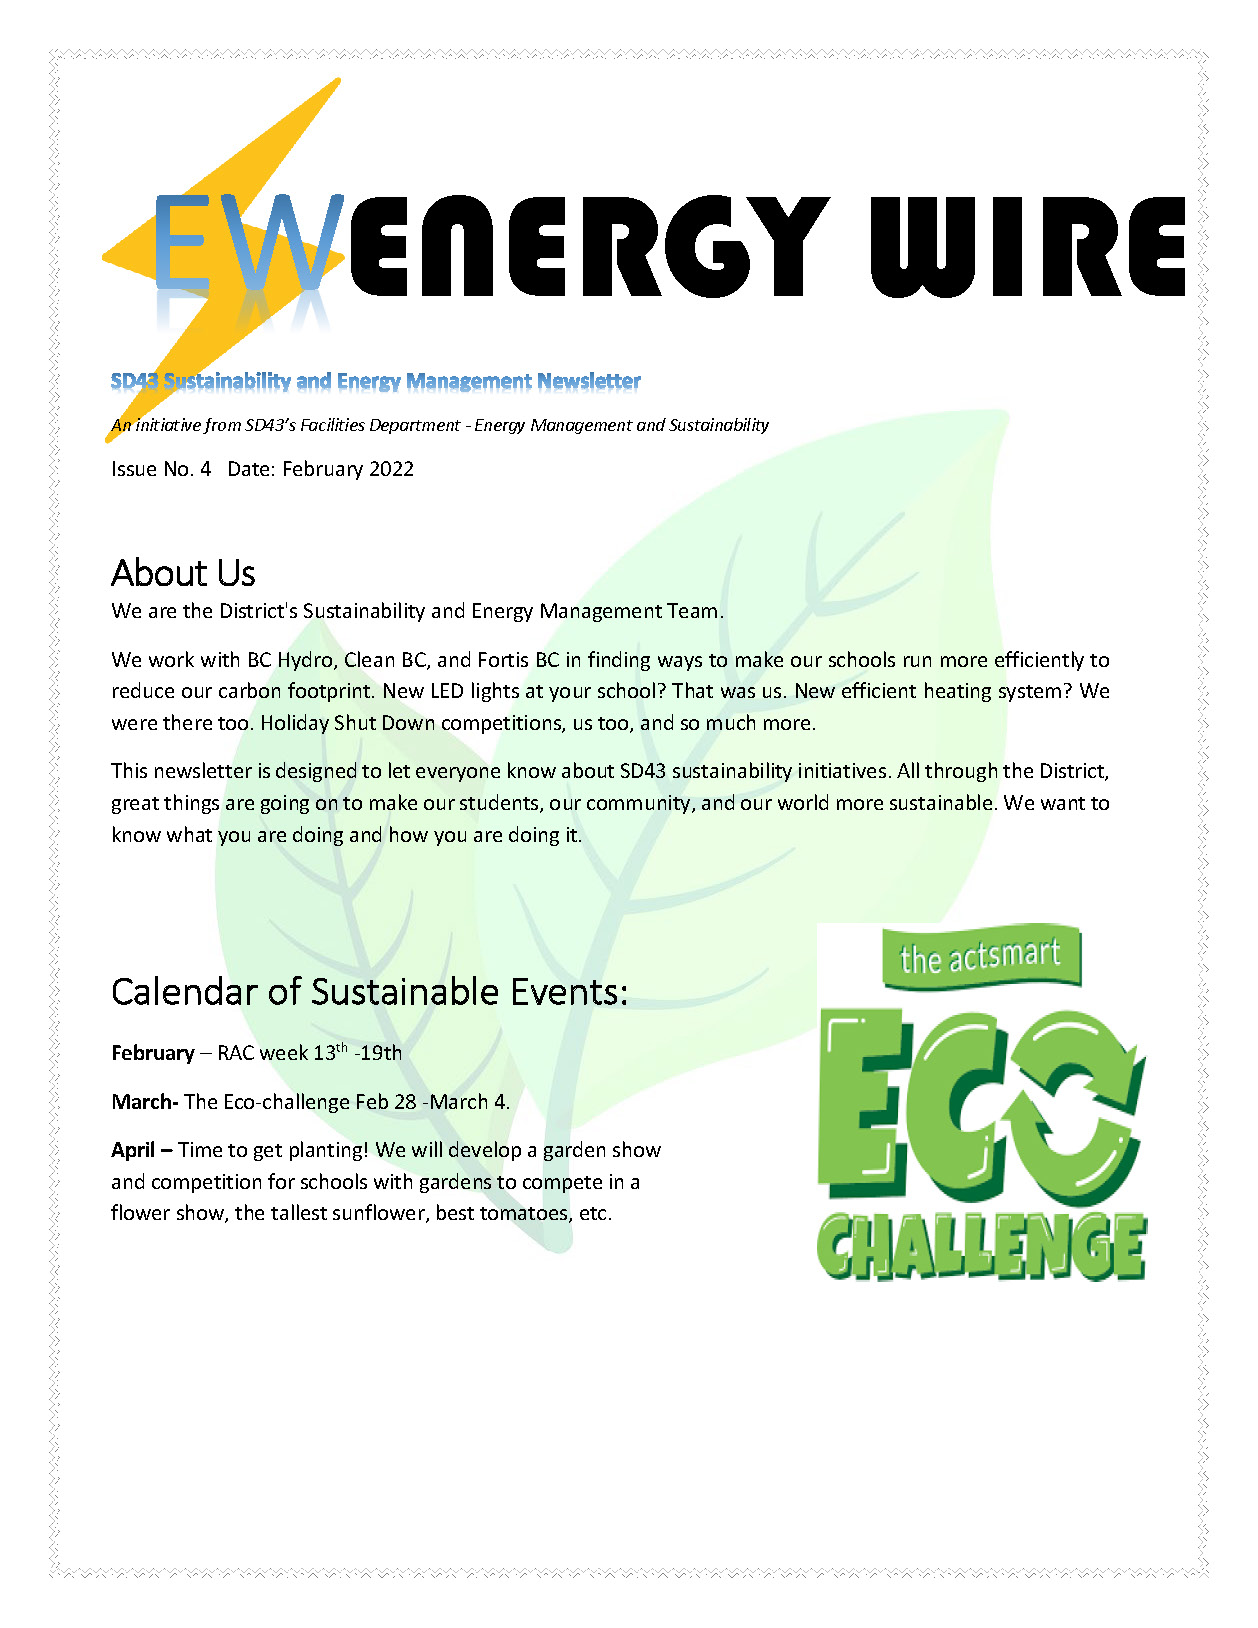 Energy Wire Newsletter February 2022_Page_1.jpg